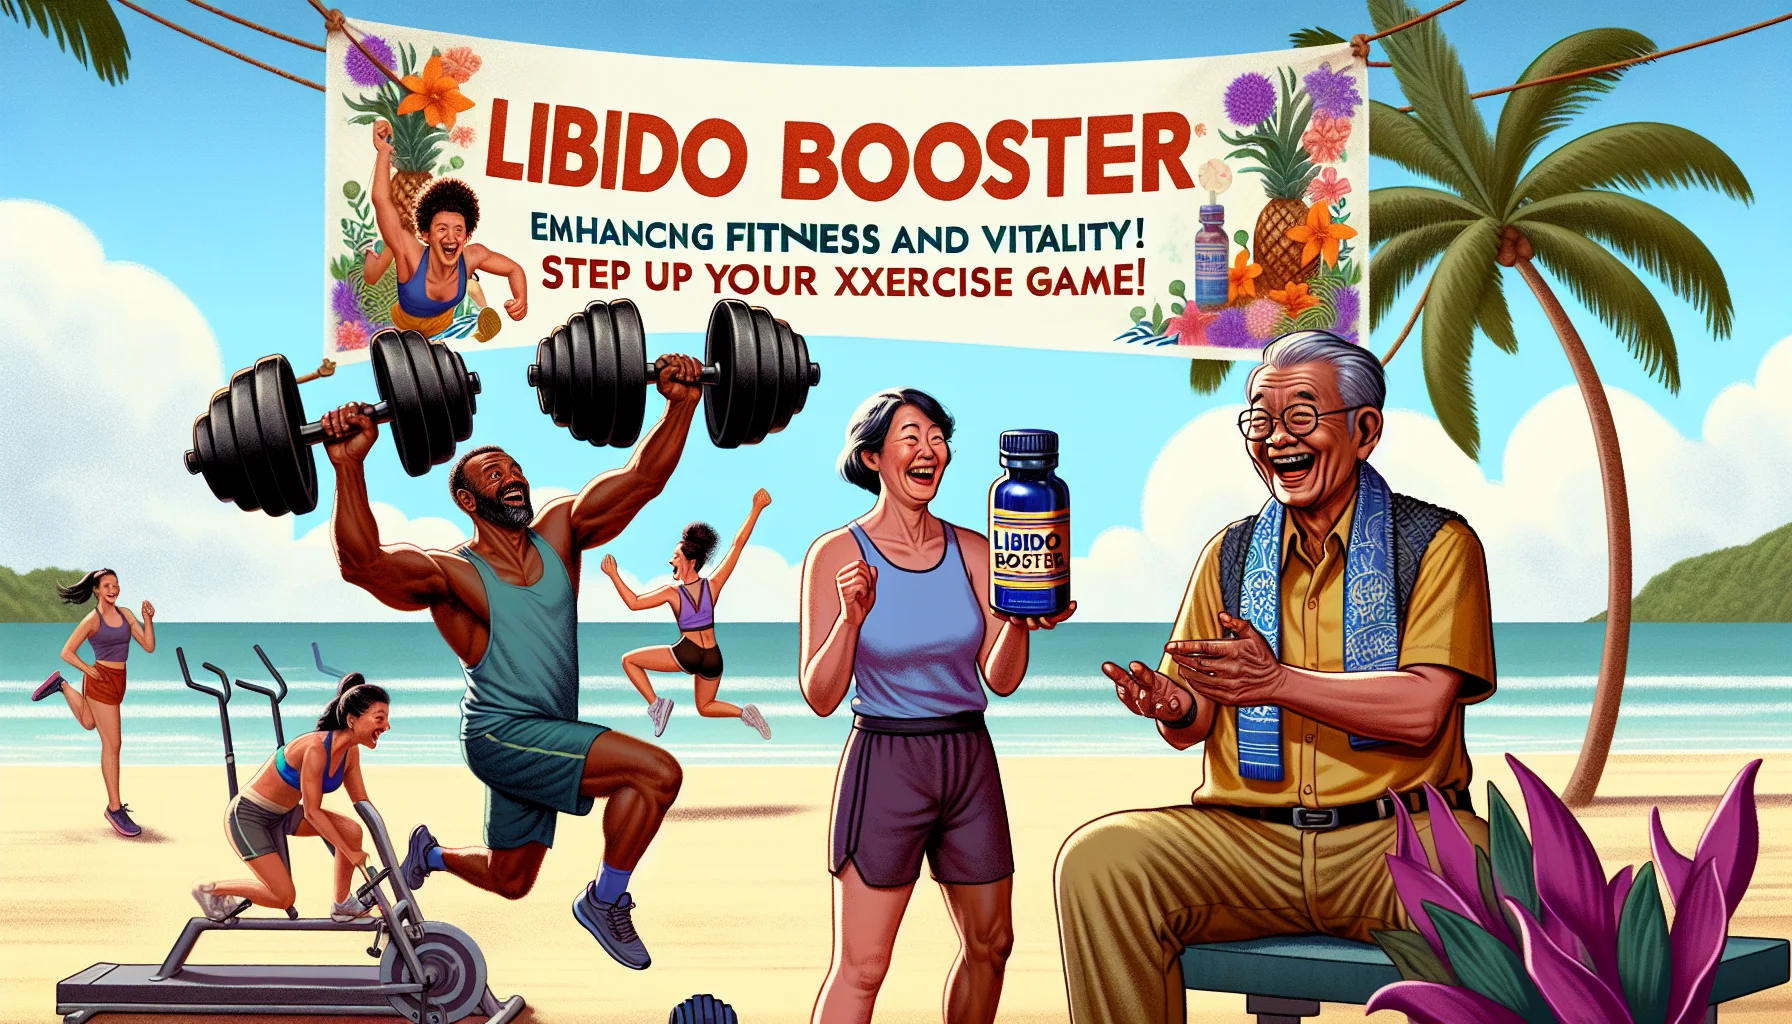 An amusing image showcasing a fictitious product called 'Libido Booster: Enhancing Fitness and Vitality'. It's a lively day at a beachside gym. A middle-aged Caucasian man with a surprised expression lifts an exceptionally heavy dumbbell. On the side, a cheerful black woman in athletic gear does backflips out of excitement. The fitness trainer, an elderly South Asian lady, is laughing heartily as she holds up a bottle labeled 'Libido Booster'. There is a banner behind them reading: 'Boost Your Fitness and Vitality! Step Up Your Exercise Game!' The humorous atmosphere encourages people to join in on the fun.